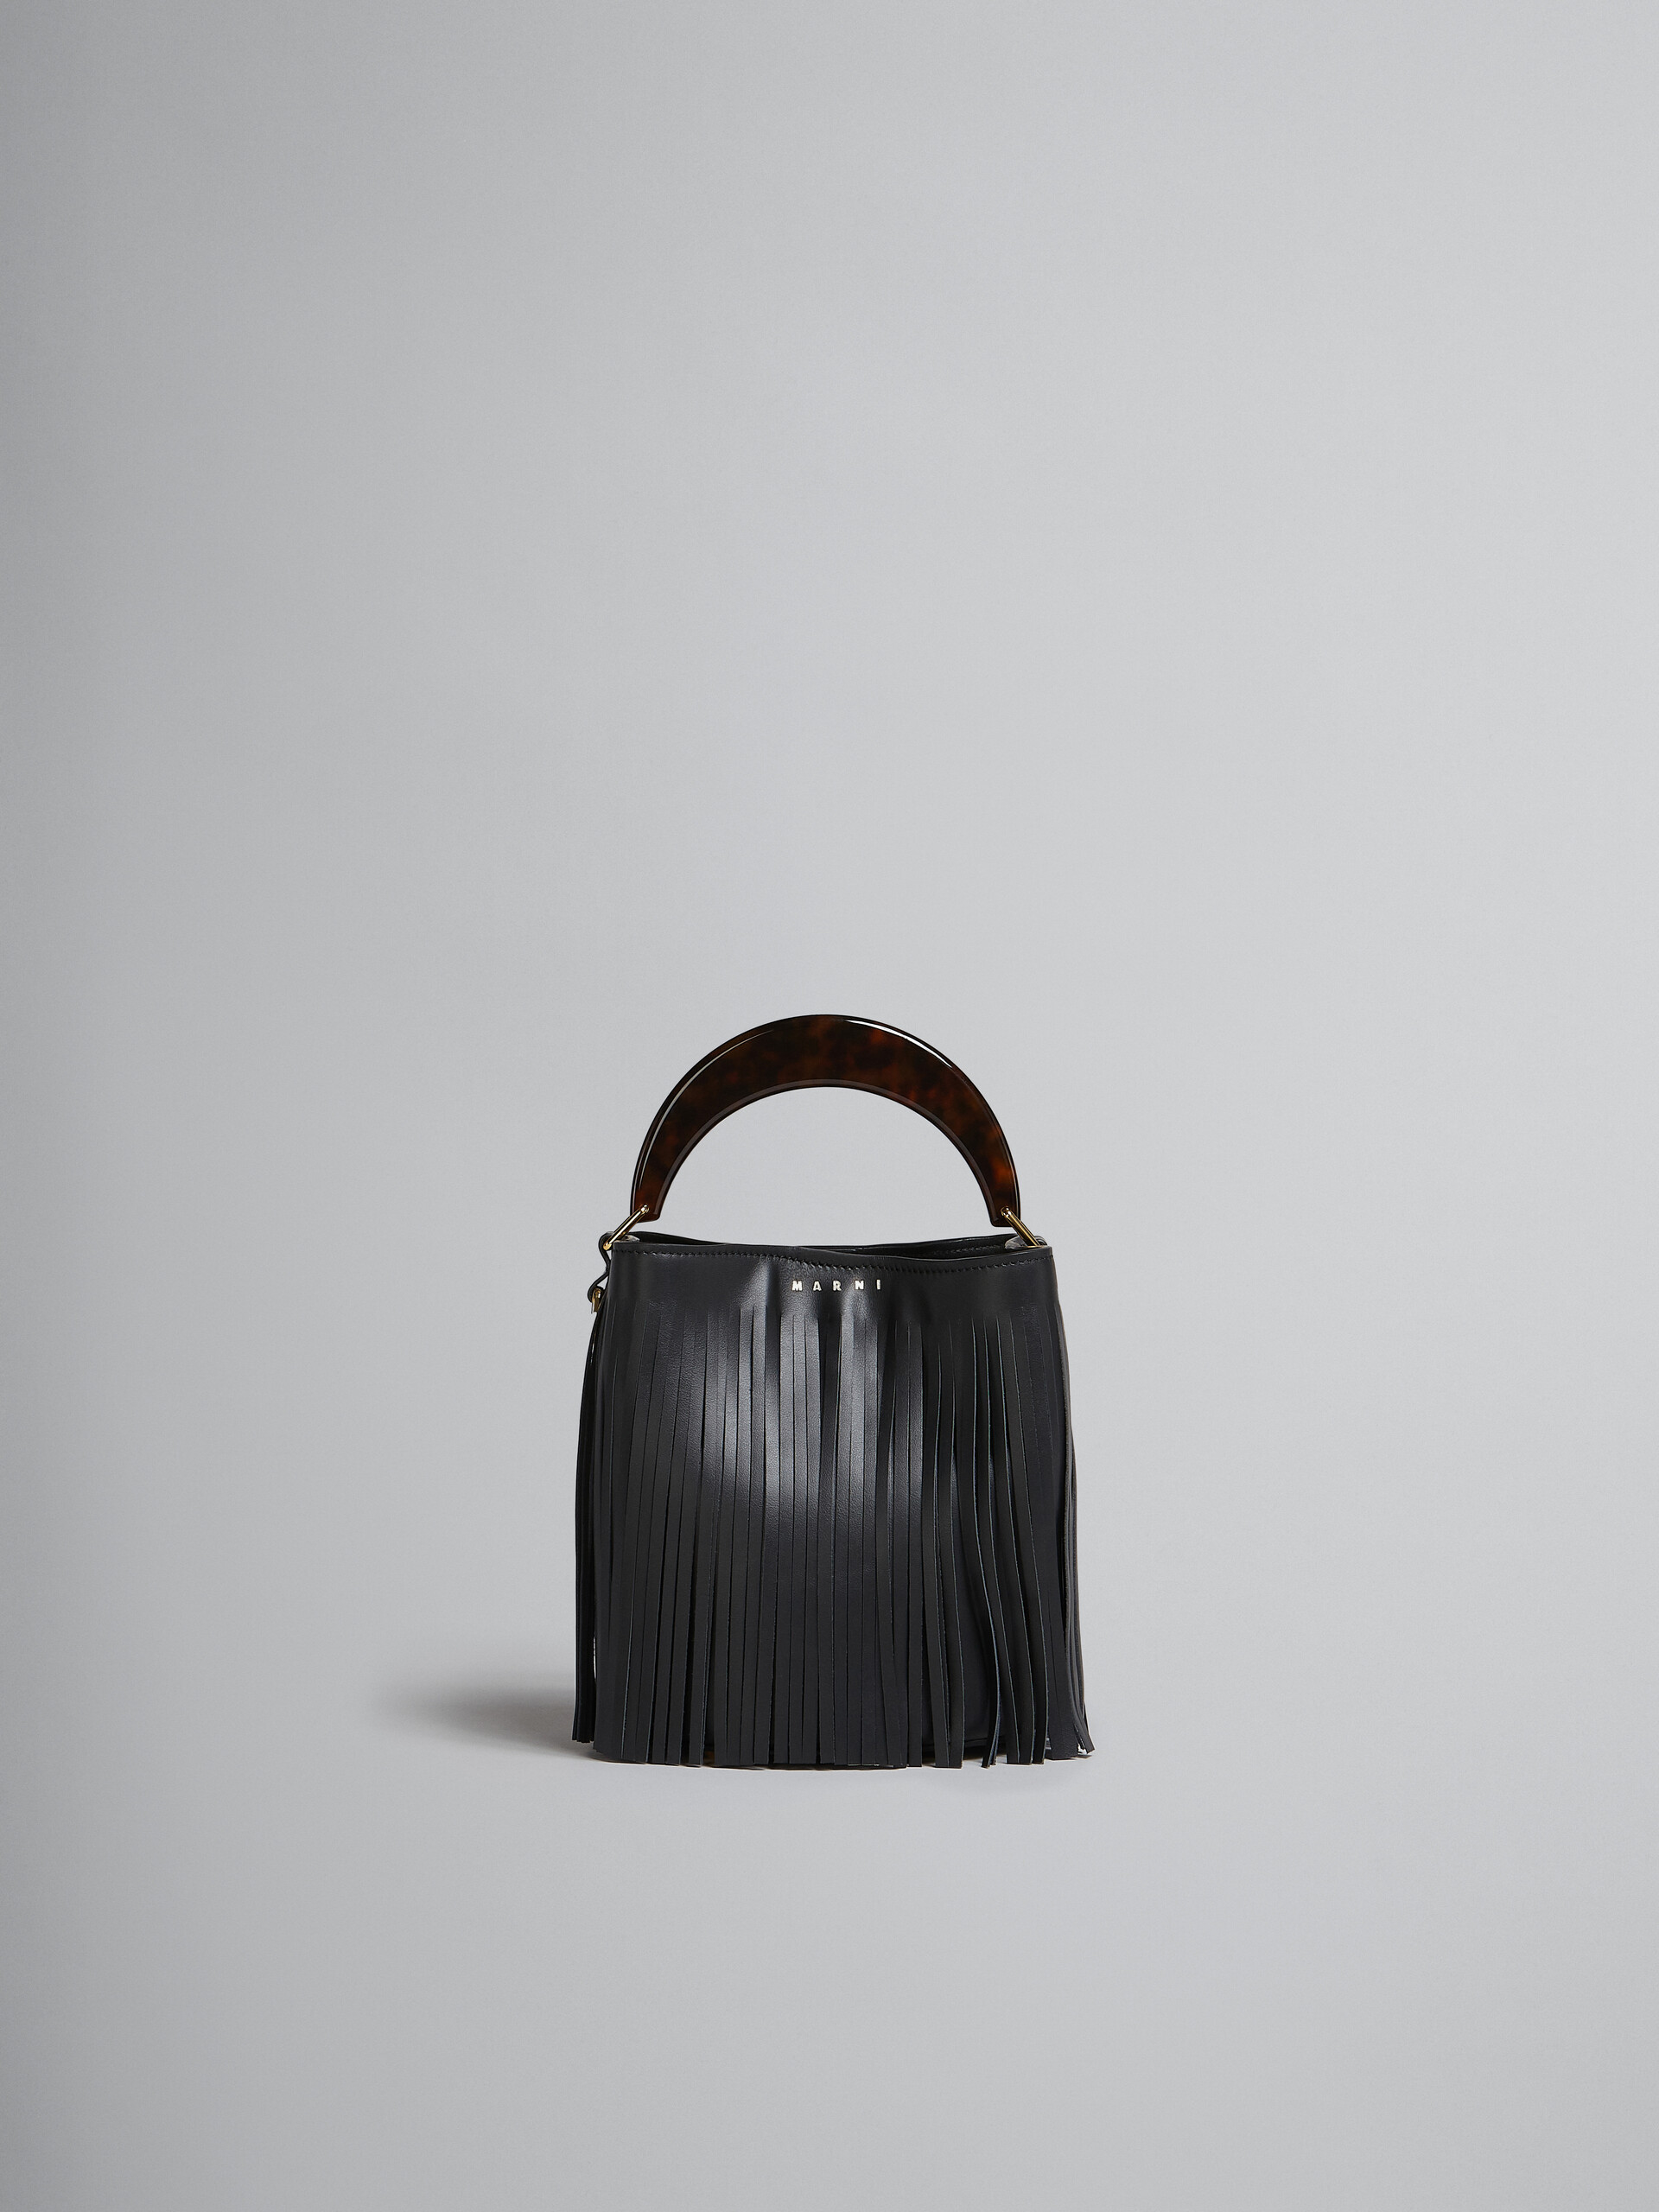 Venice Small Bucket in black leather with fringes - Shoulder Bags - Image 1